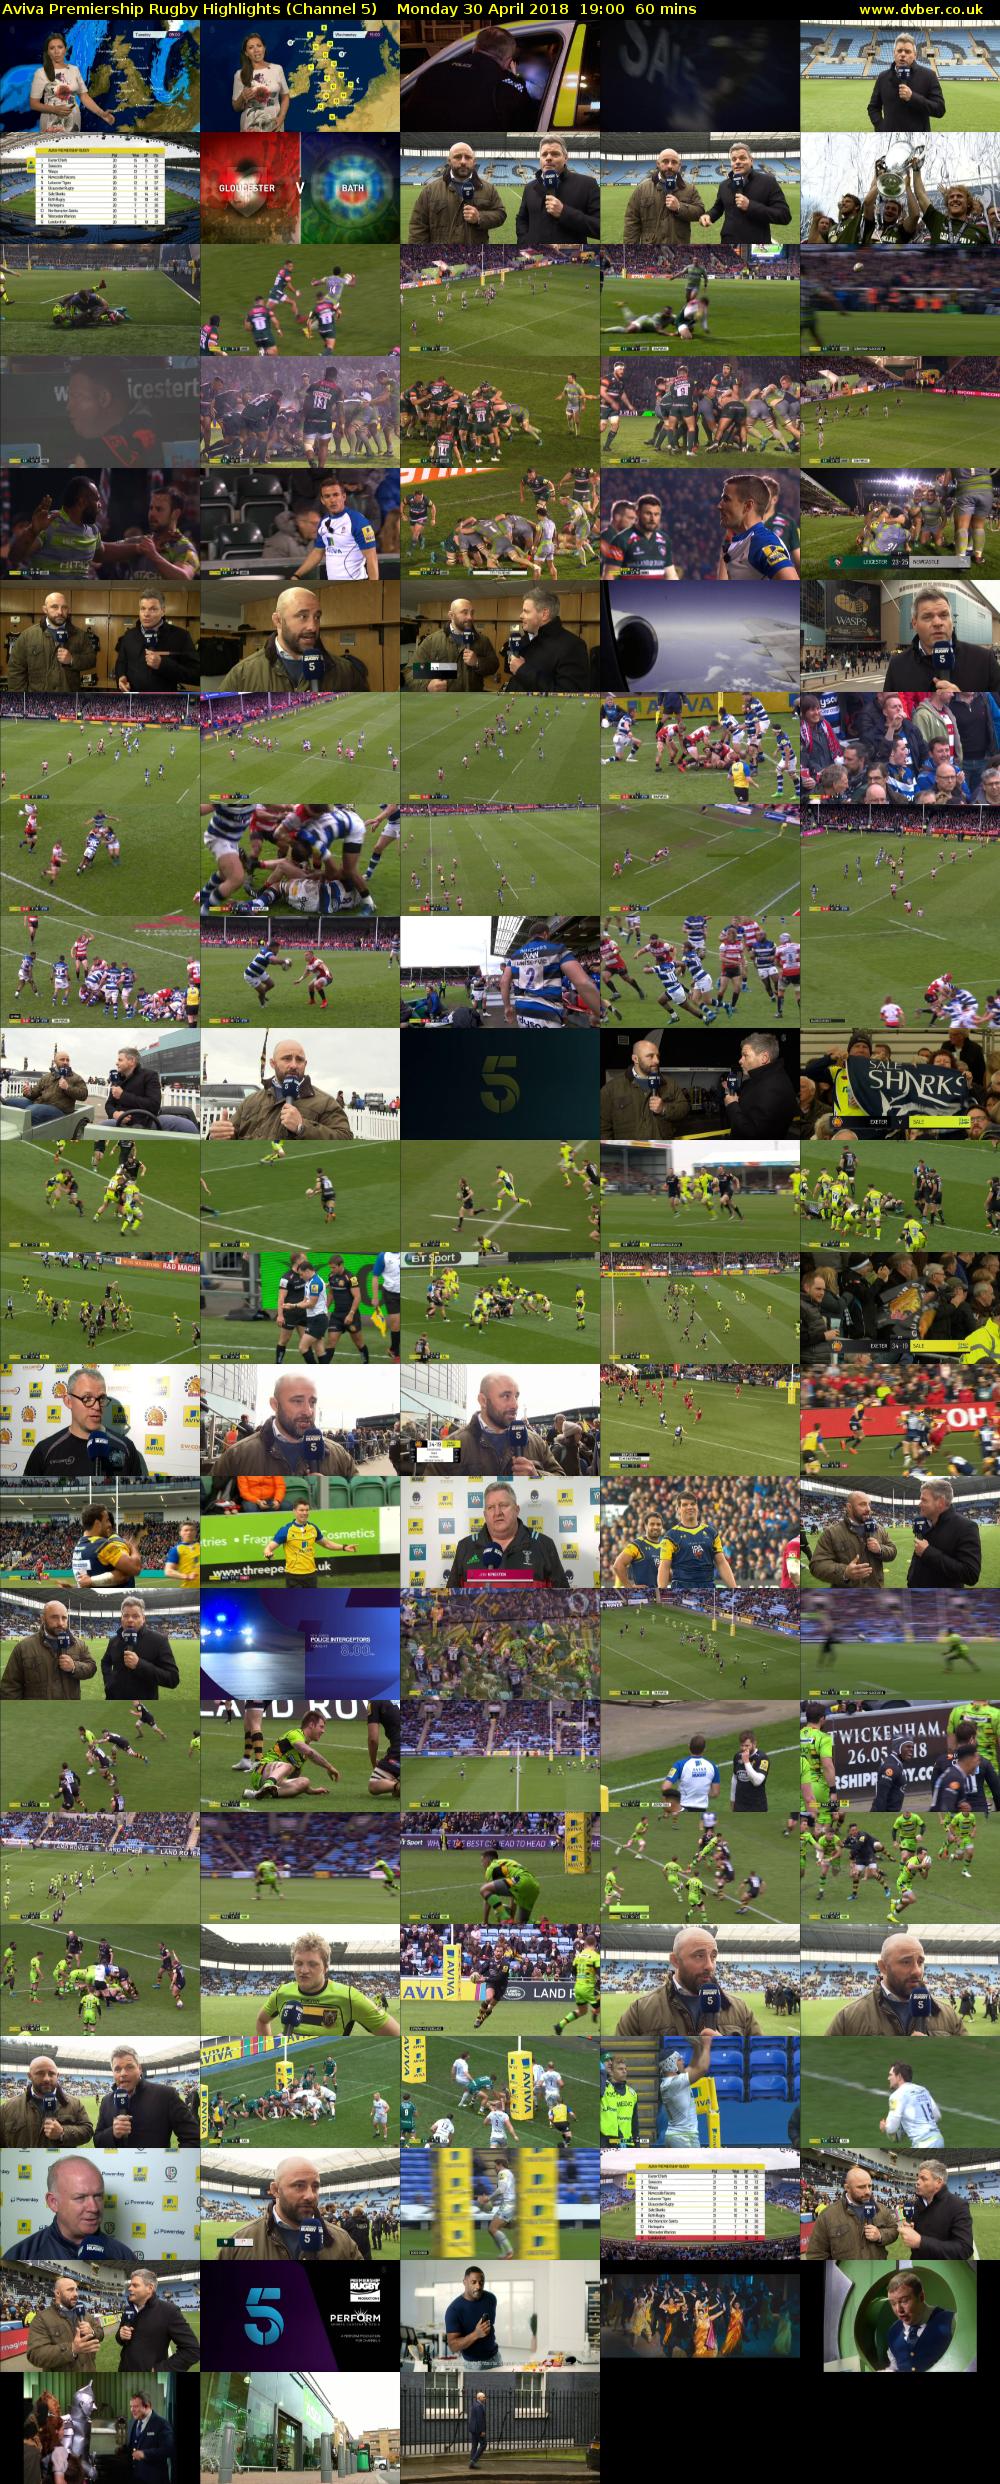 Aviva Premiership Rugby Highlights (Channel 5) Monday 30 April 2018 19:00 - 20:00